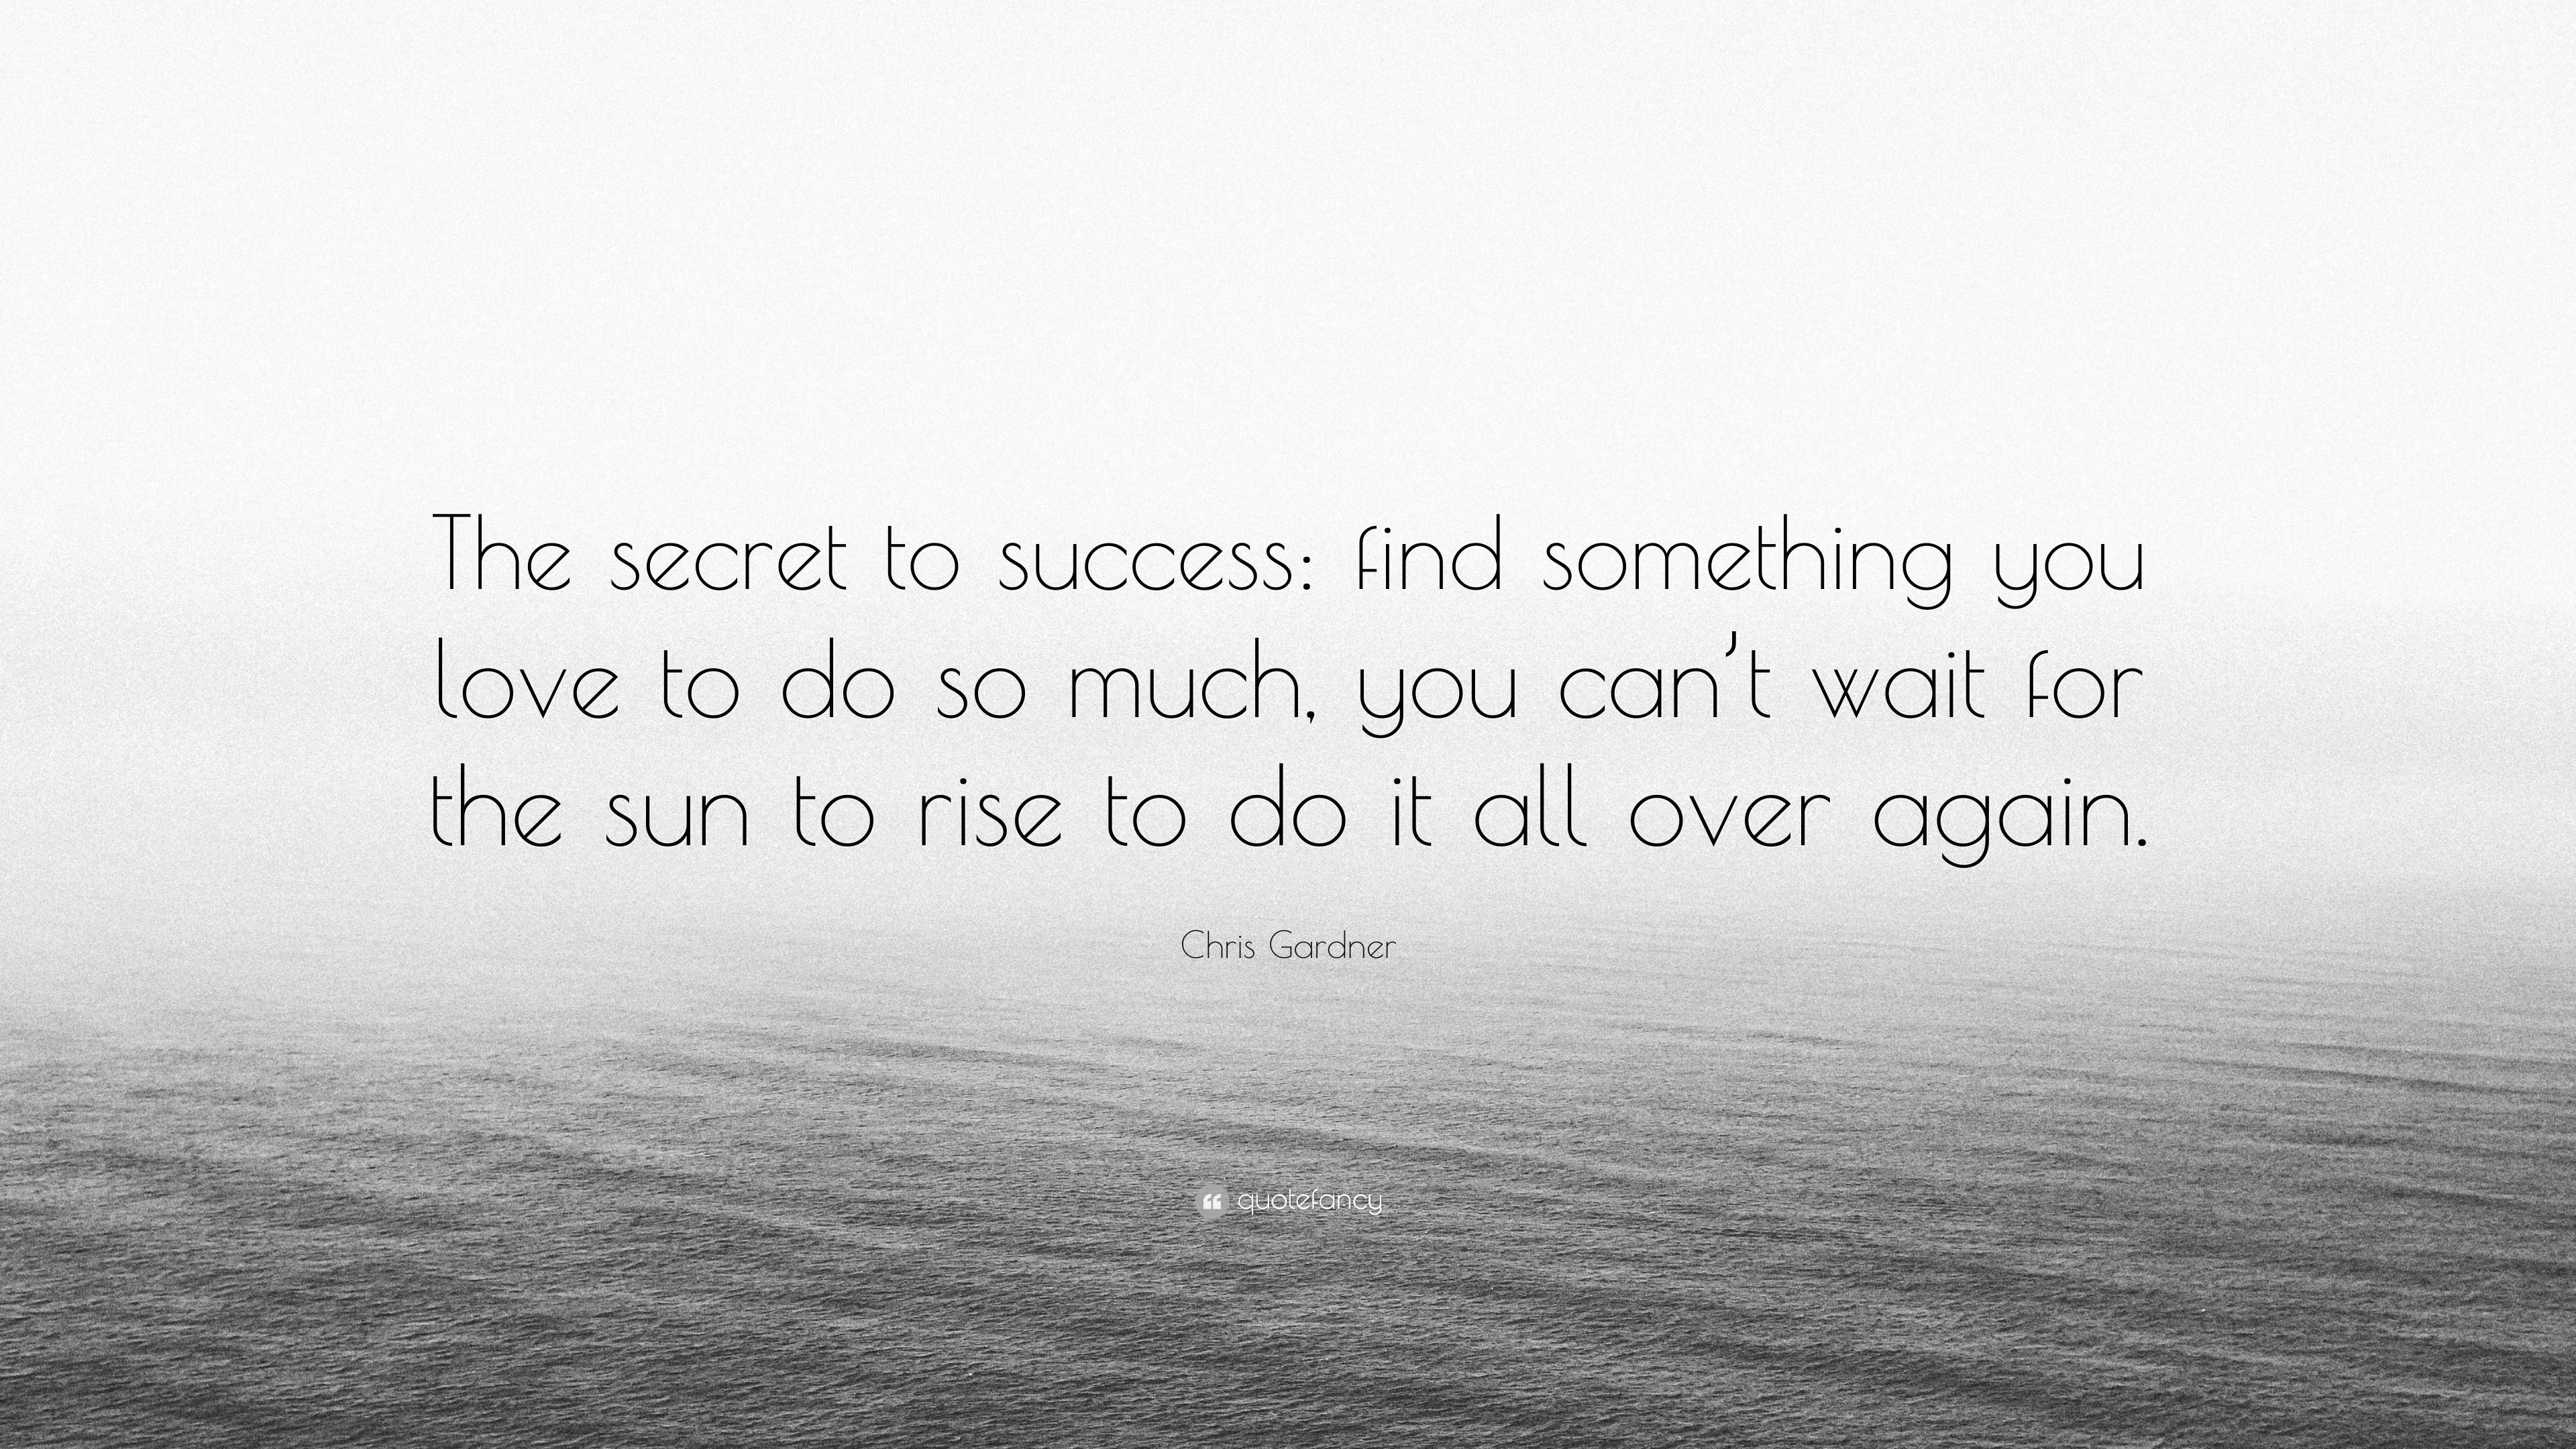 Chris Gardner Quote “The secret to success find something you love to do